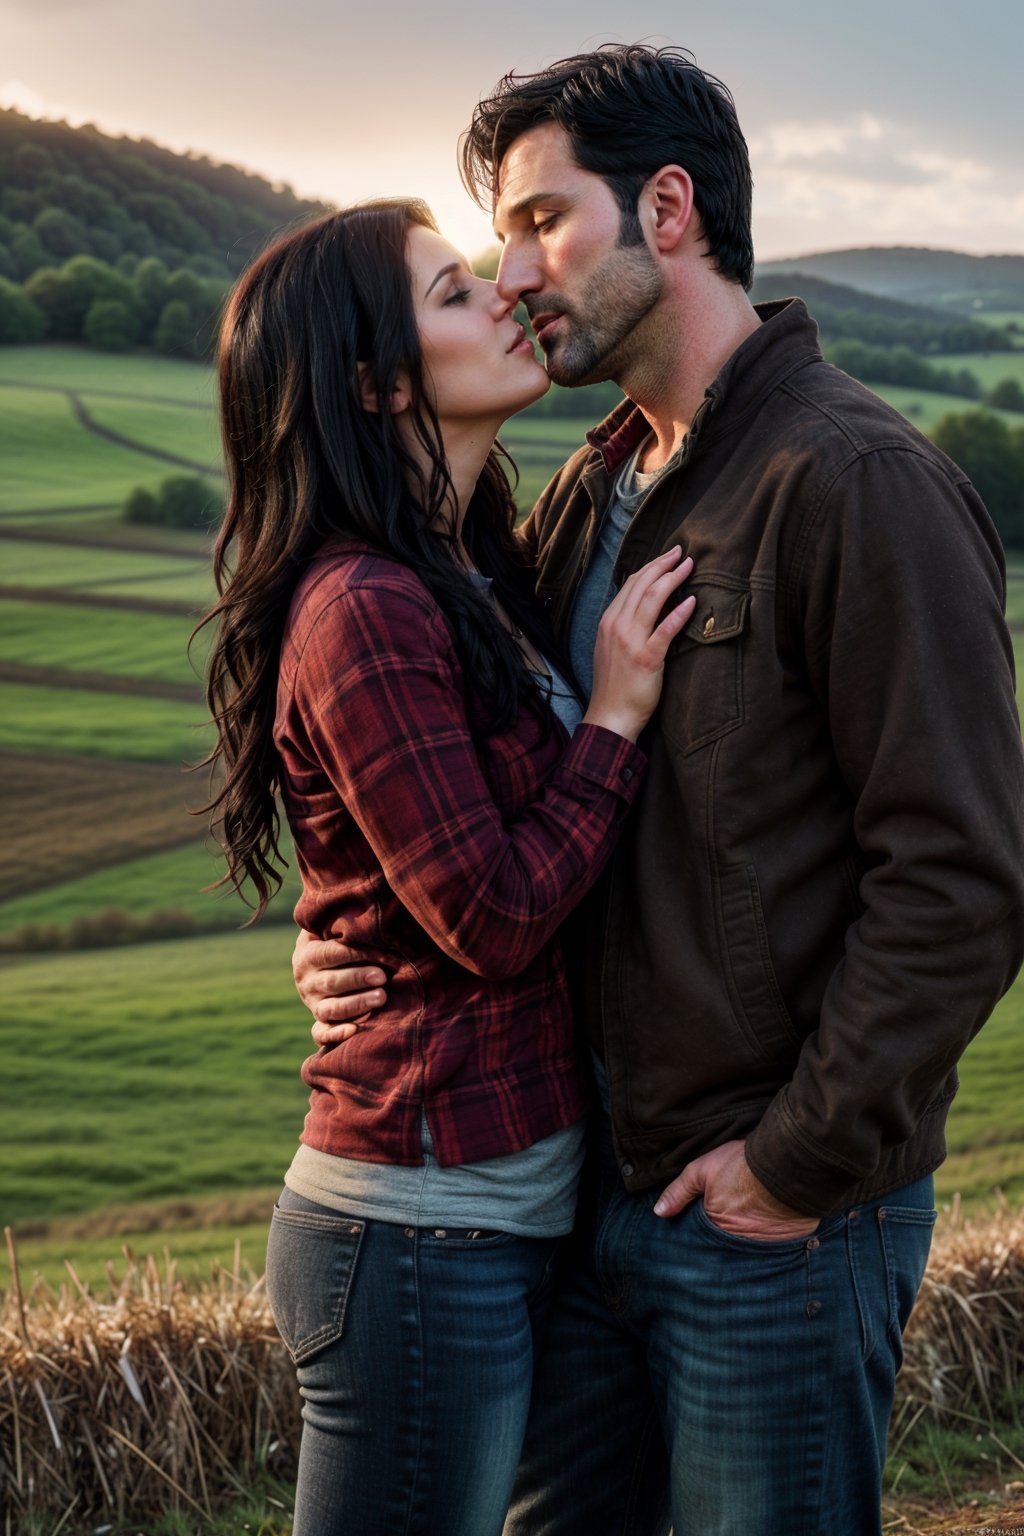 Touching scene, couple in love (farm) Emotional expression, ((a man handsome, very attractive, dark-haired, rude, 38-year-old man)) ((a woman beautiful, very beauty, dark-haired, long-haired, slender, 30-year-old woman)), Illustration, High Resolution, Lighting, Passionate, Cute Facial Features, Emotional Scene, Couple Kissing, Affectionate Expression, (Casual, Country Wear), Mixed Media Tools, Mixed Media, High Resolution, Warm Lighting, Affectionate Intimate Facial Features, Beautiful Landscape Background